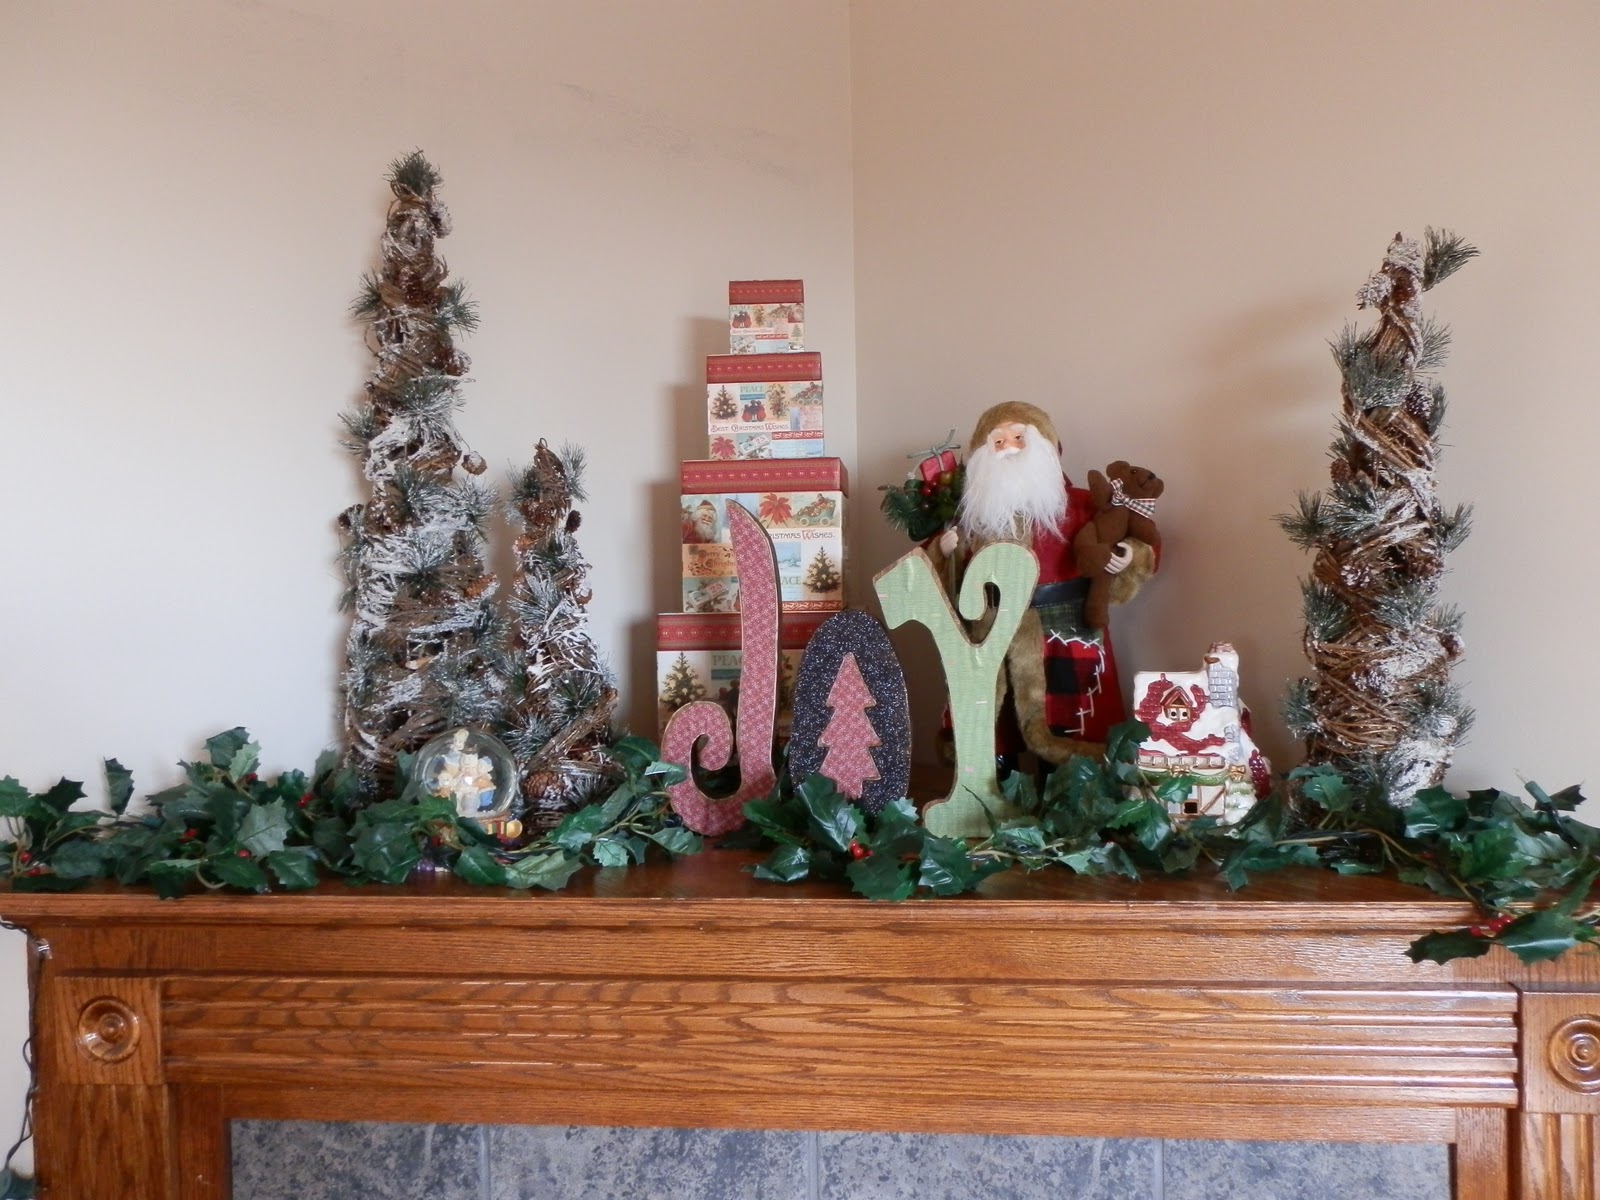 Prepared LDS Family: Corner Fireplace Mantle Decorated for Christmas